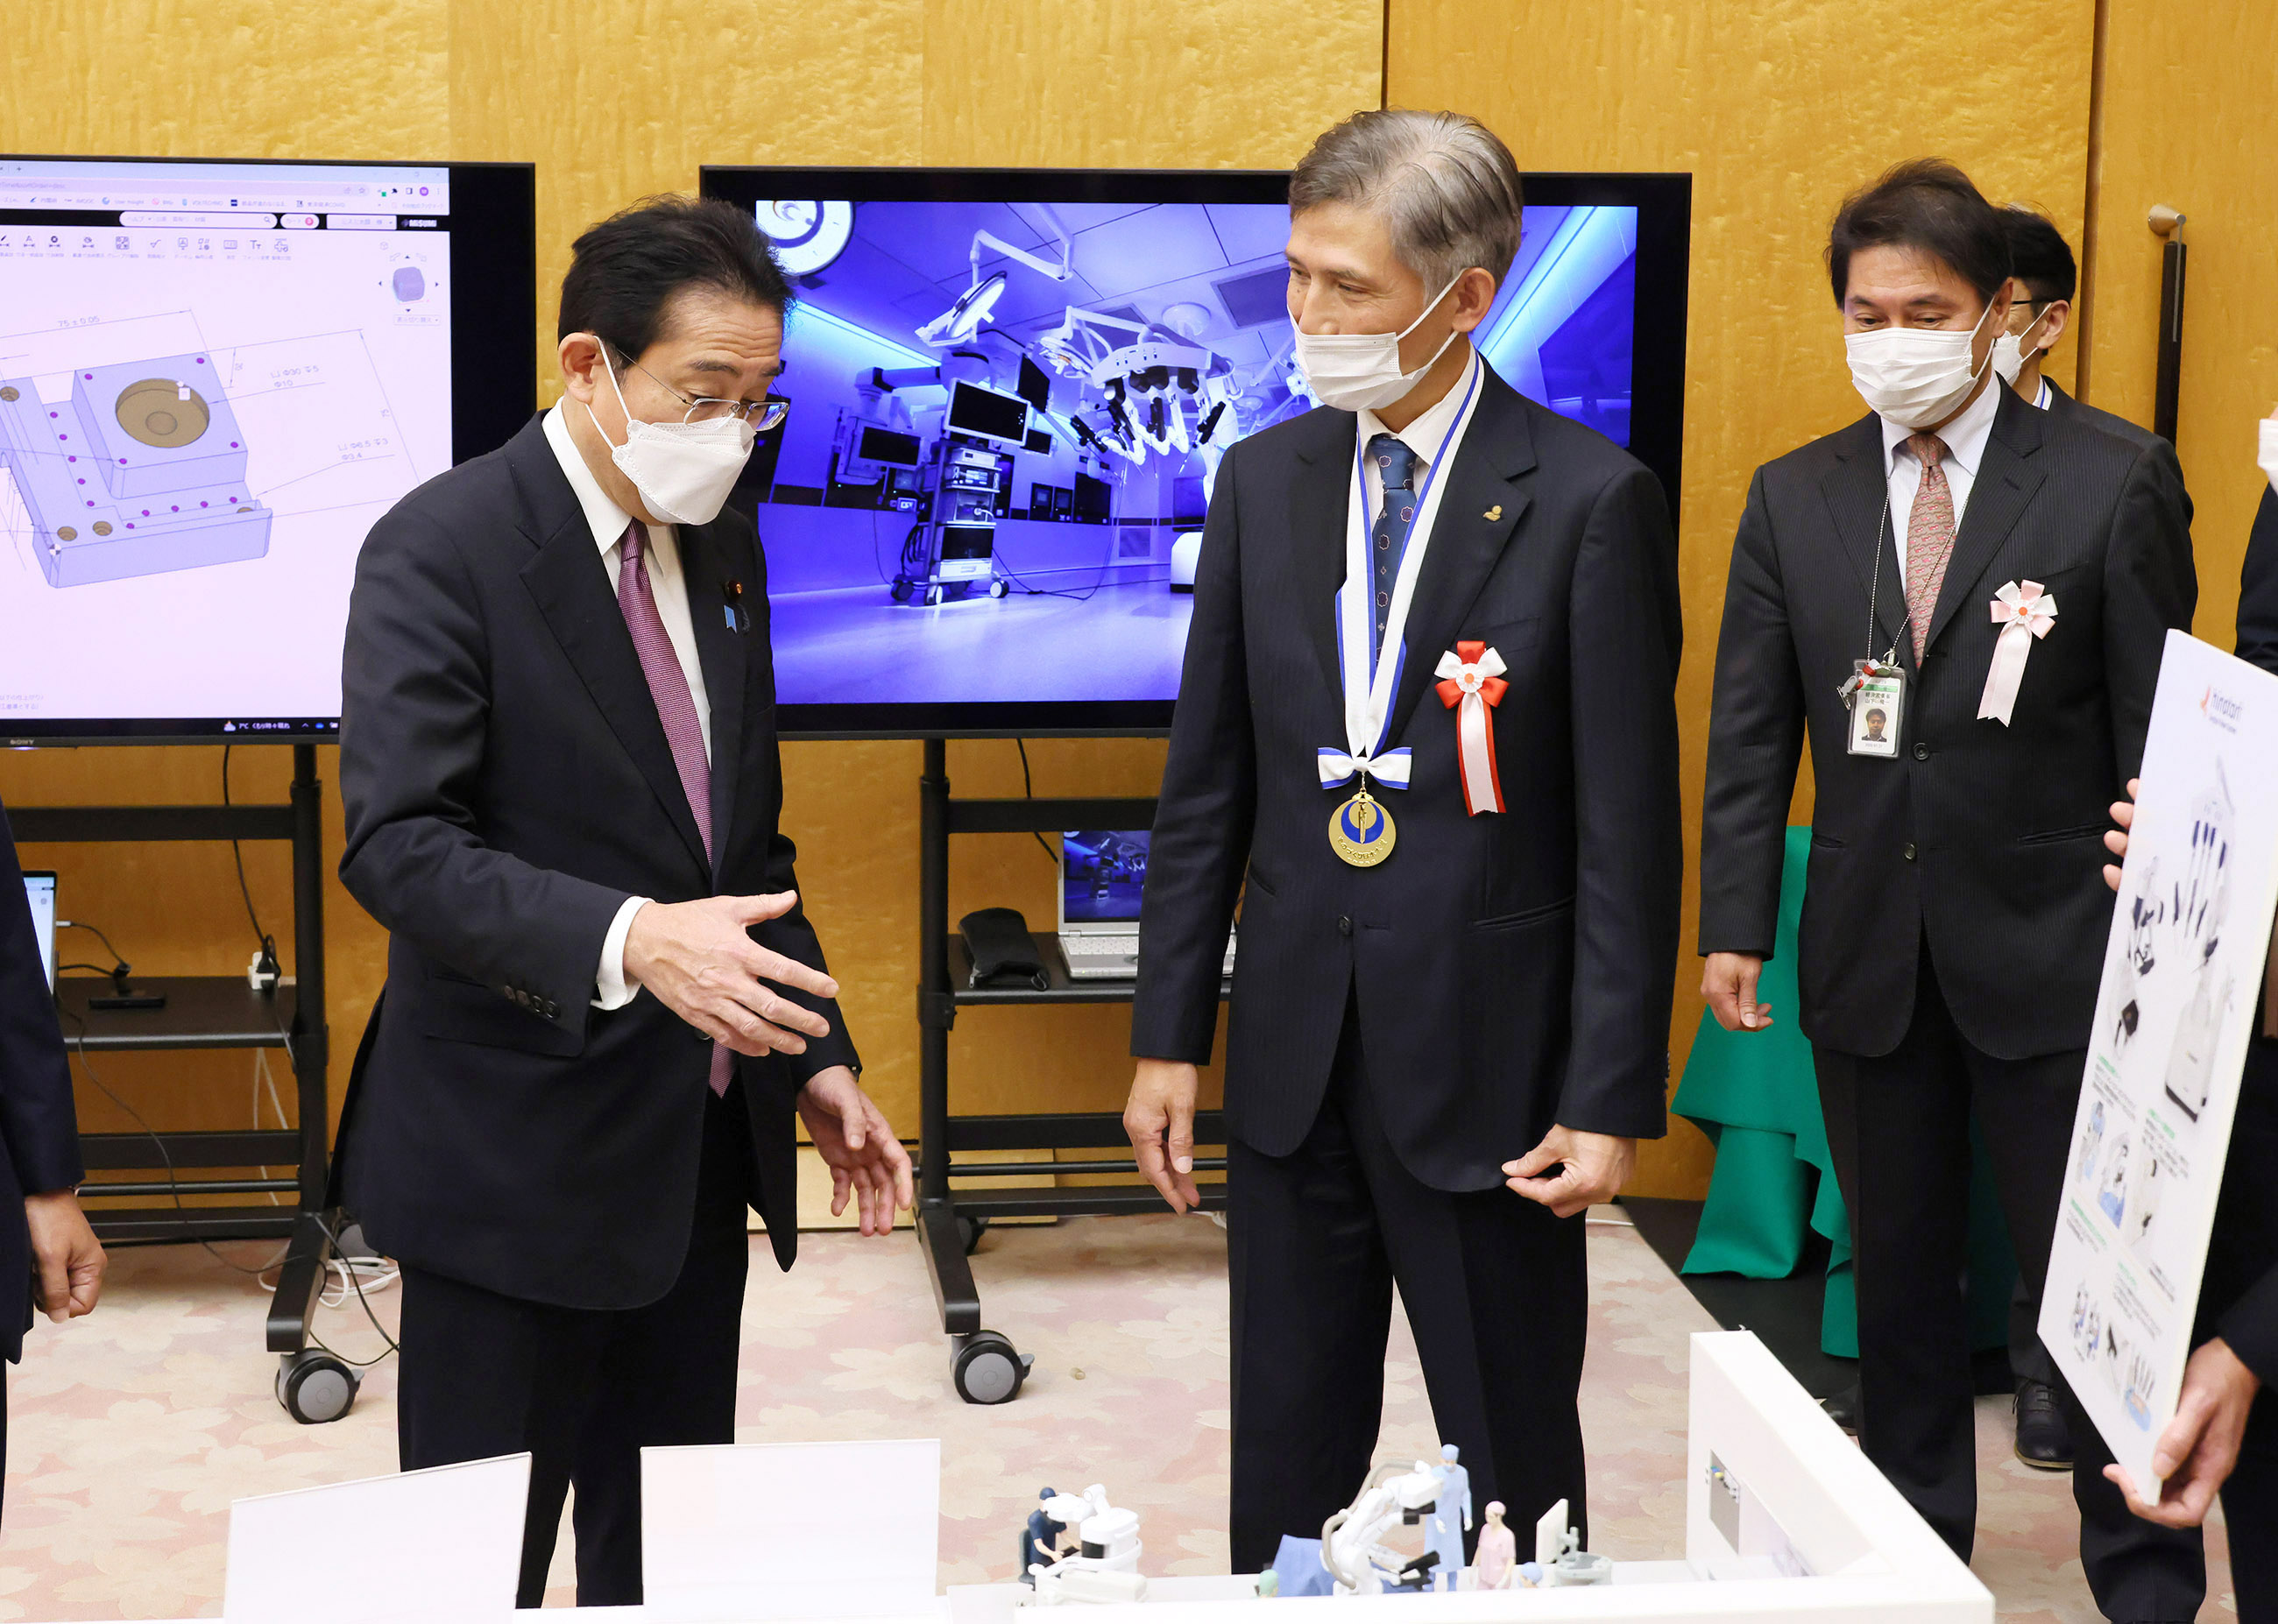 Prime Minister Kishida receiving an explanation on a product sample on display (1)